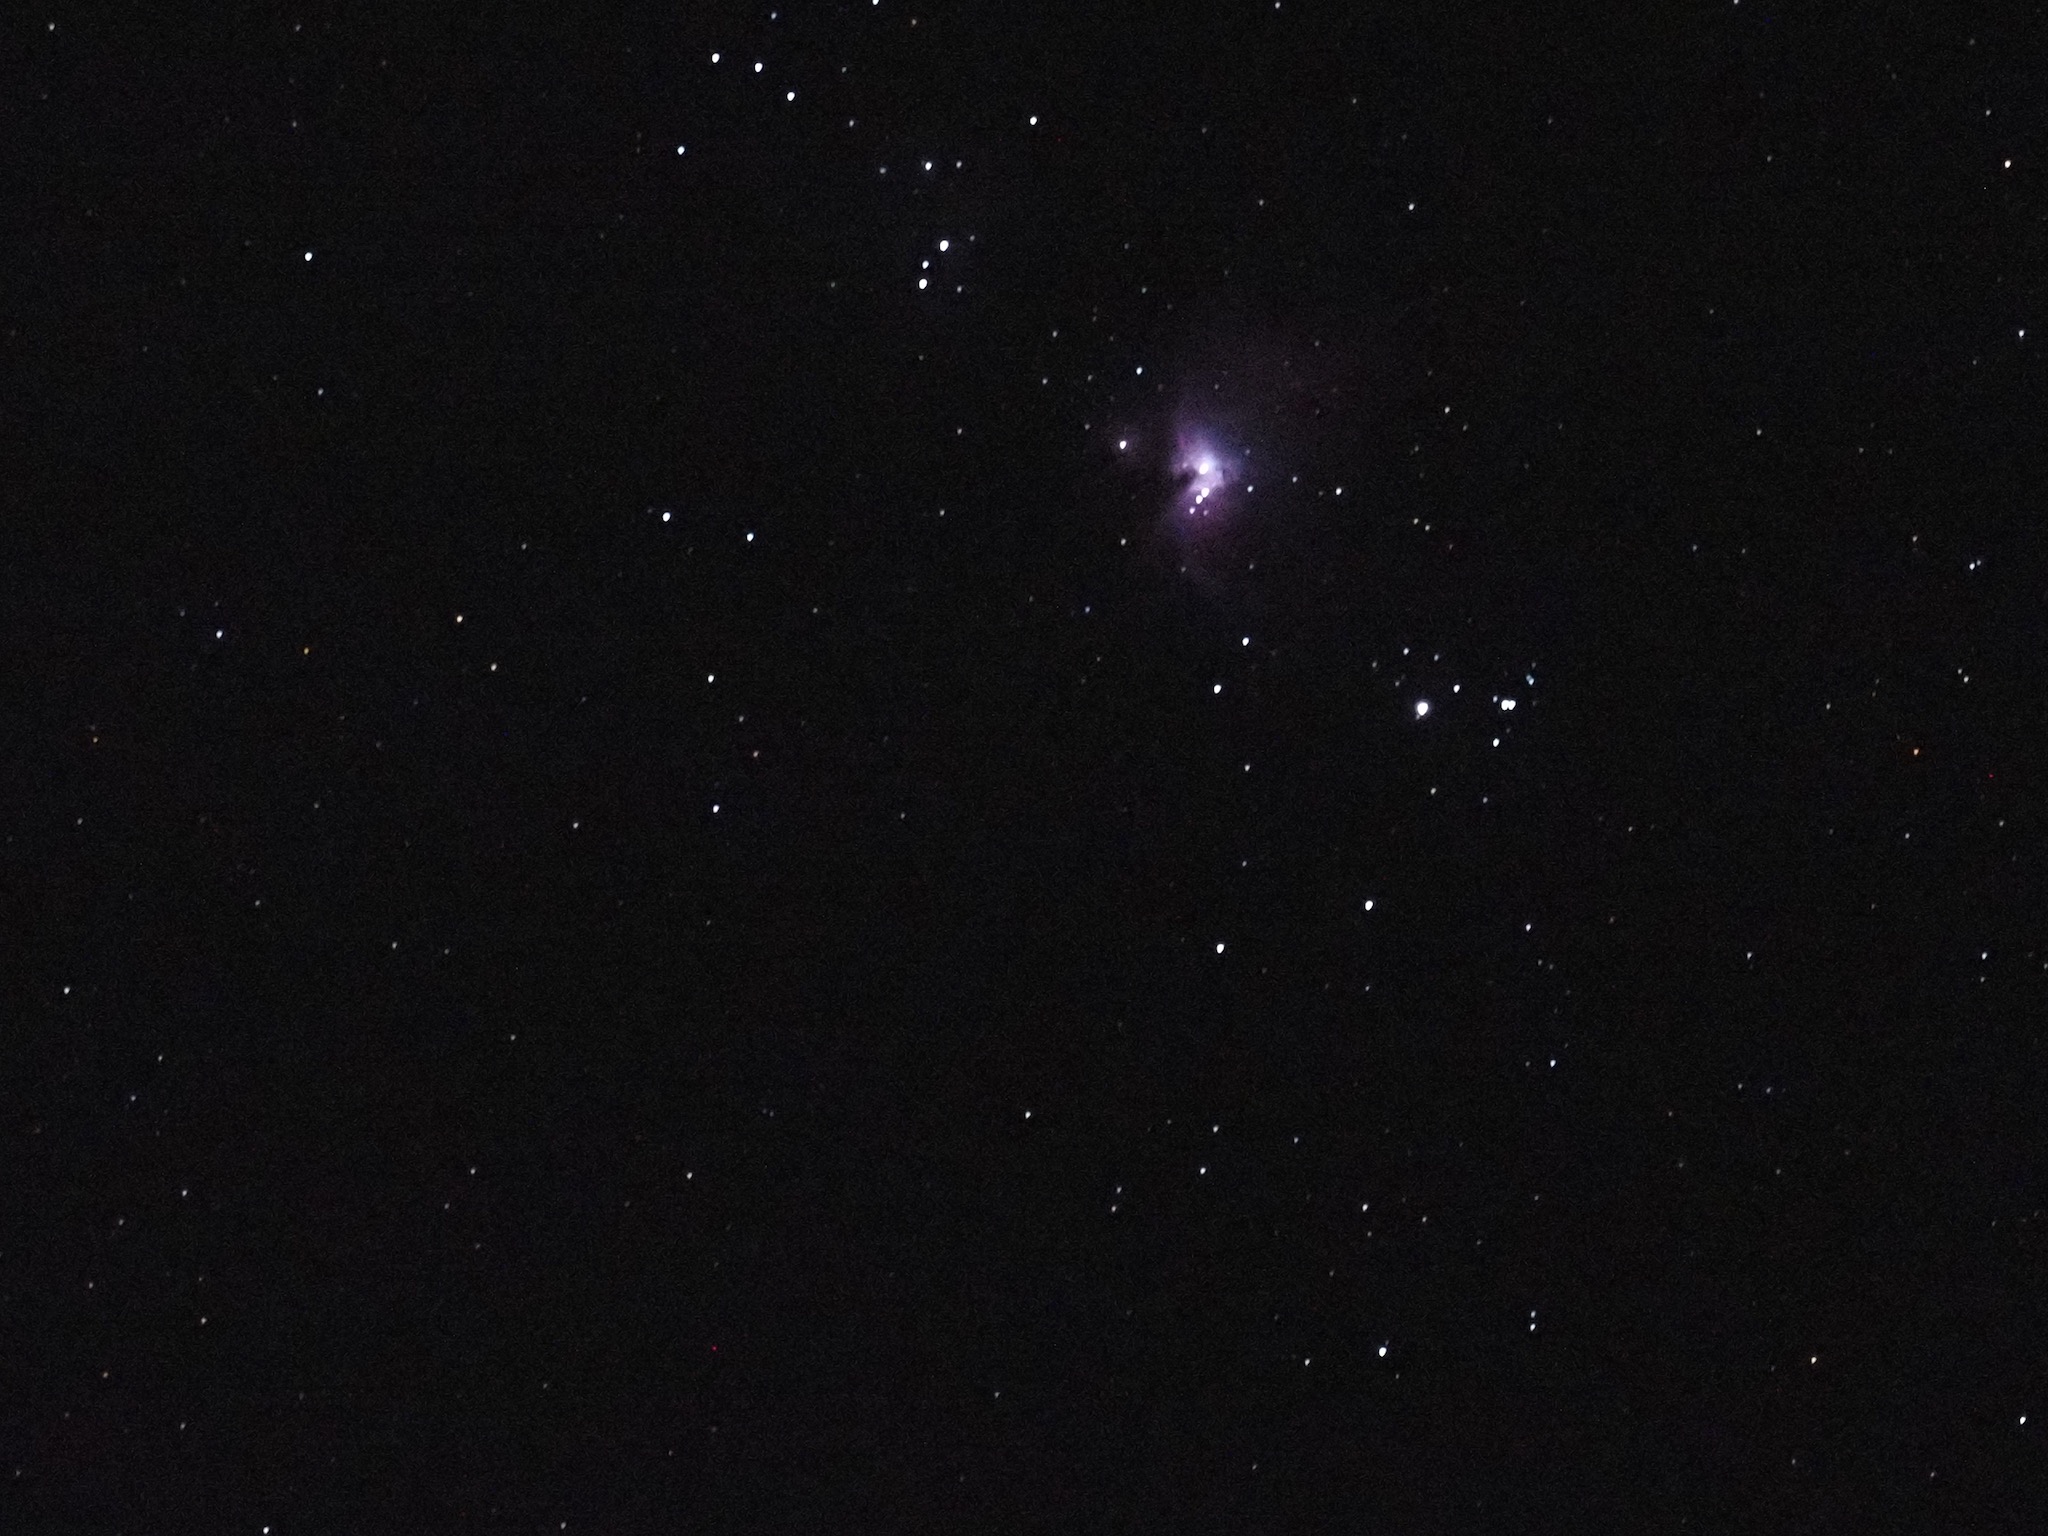 Single frame of the Orion Nebula before stacking